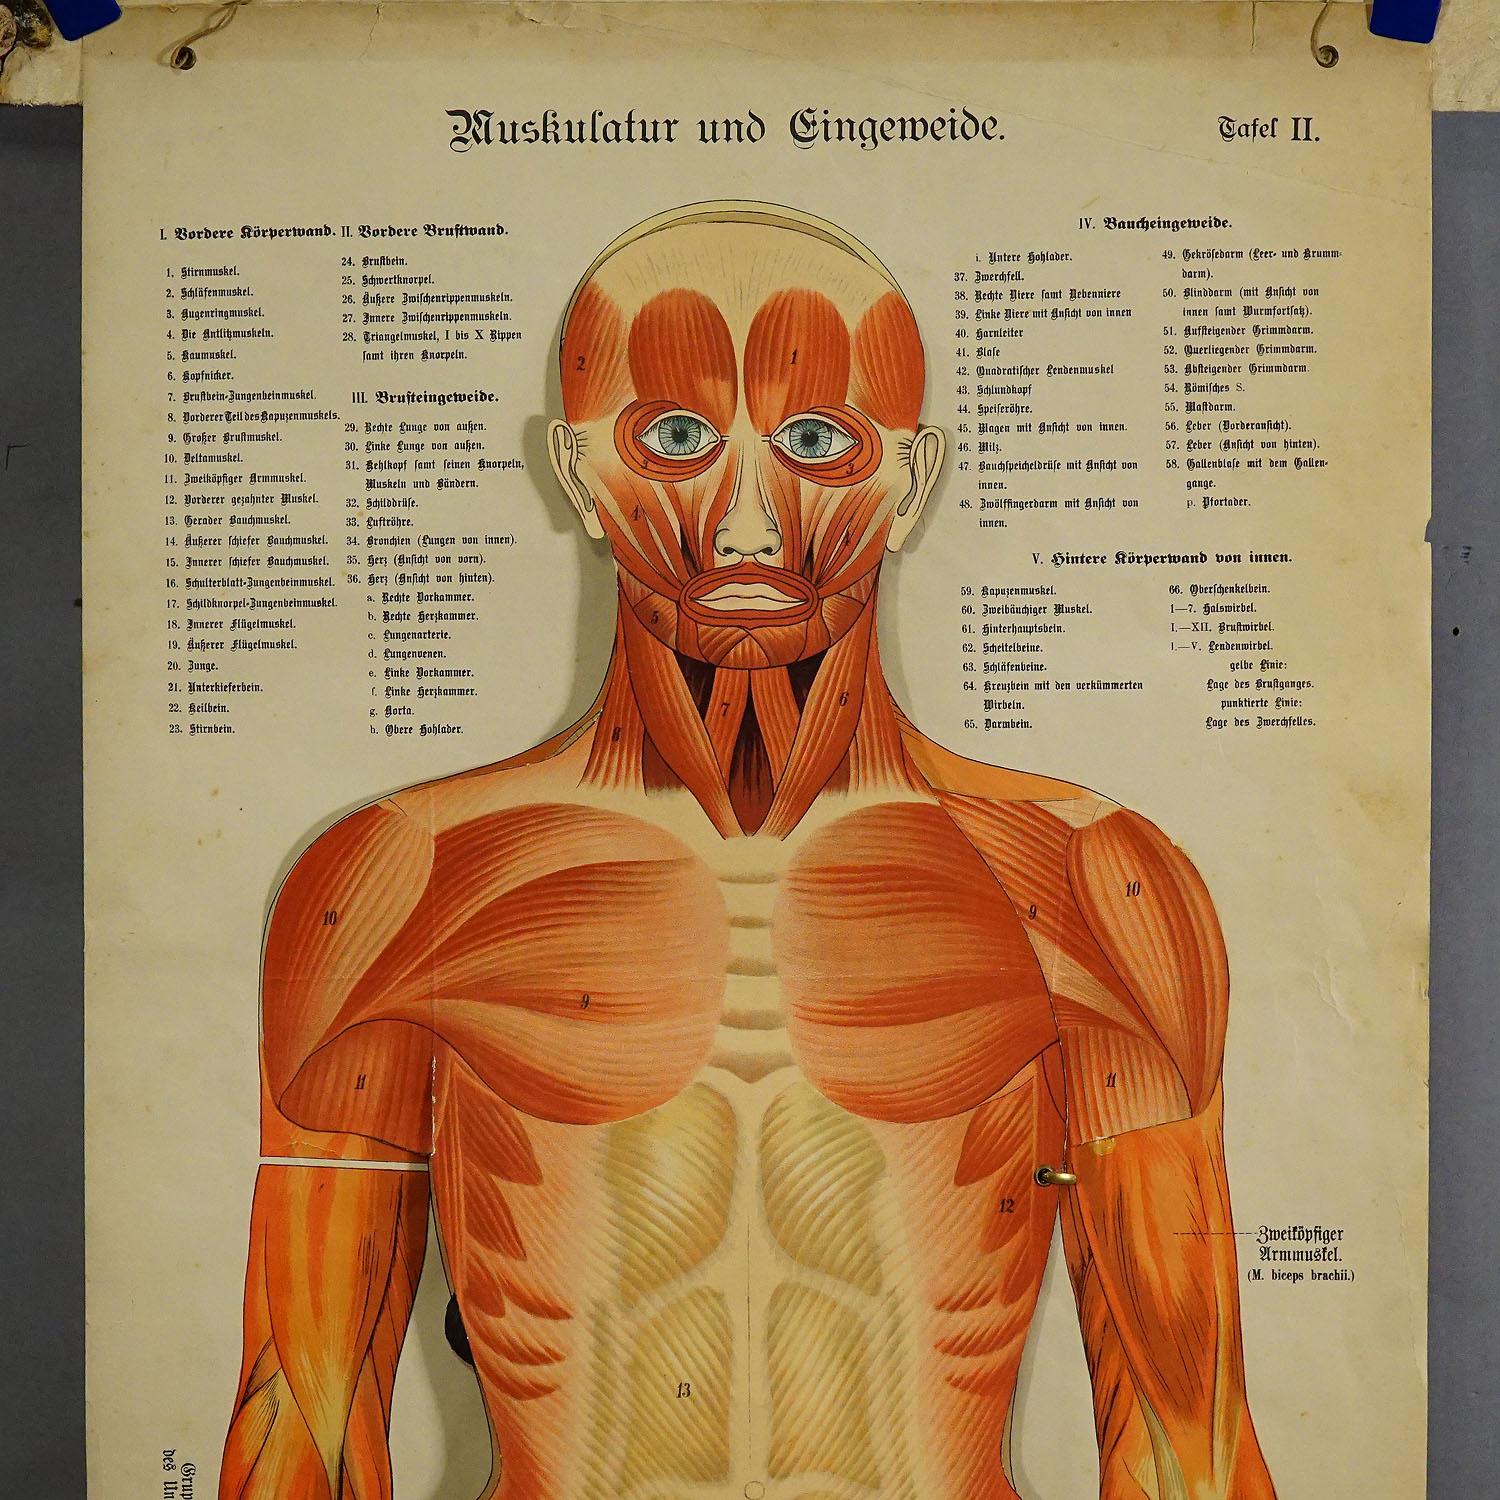 A rare 19th century anatomical wall chart depicting human musculature and internal organs. With removable multicolored human organs like lung, heart, liver, kidney etc. By folding of the multiple layers the structure of the organs is displayed very